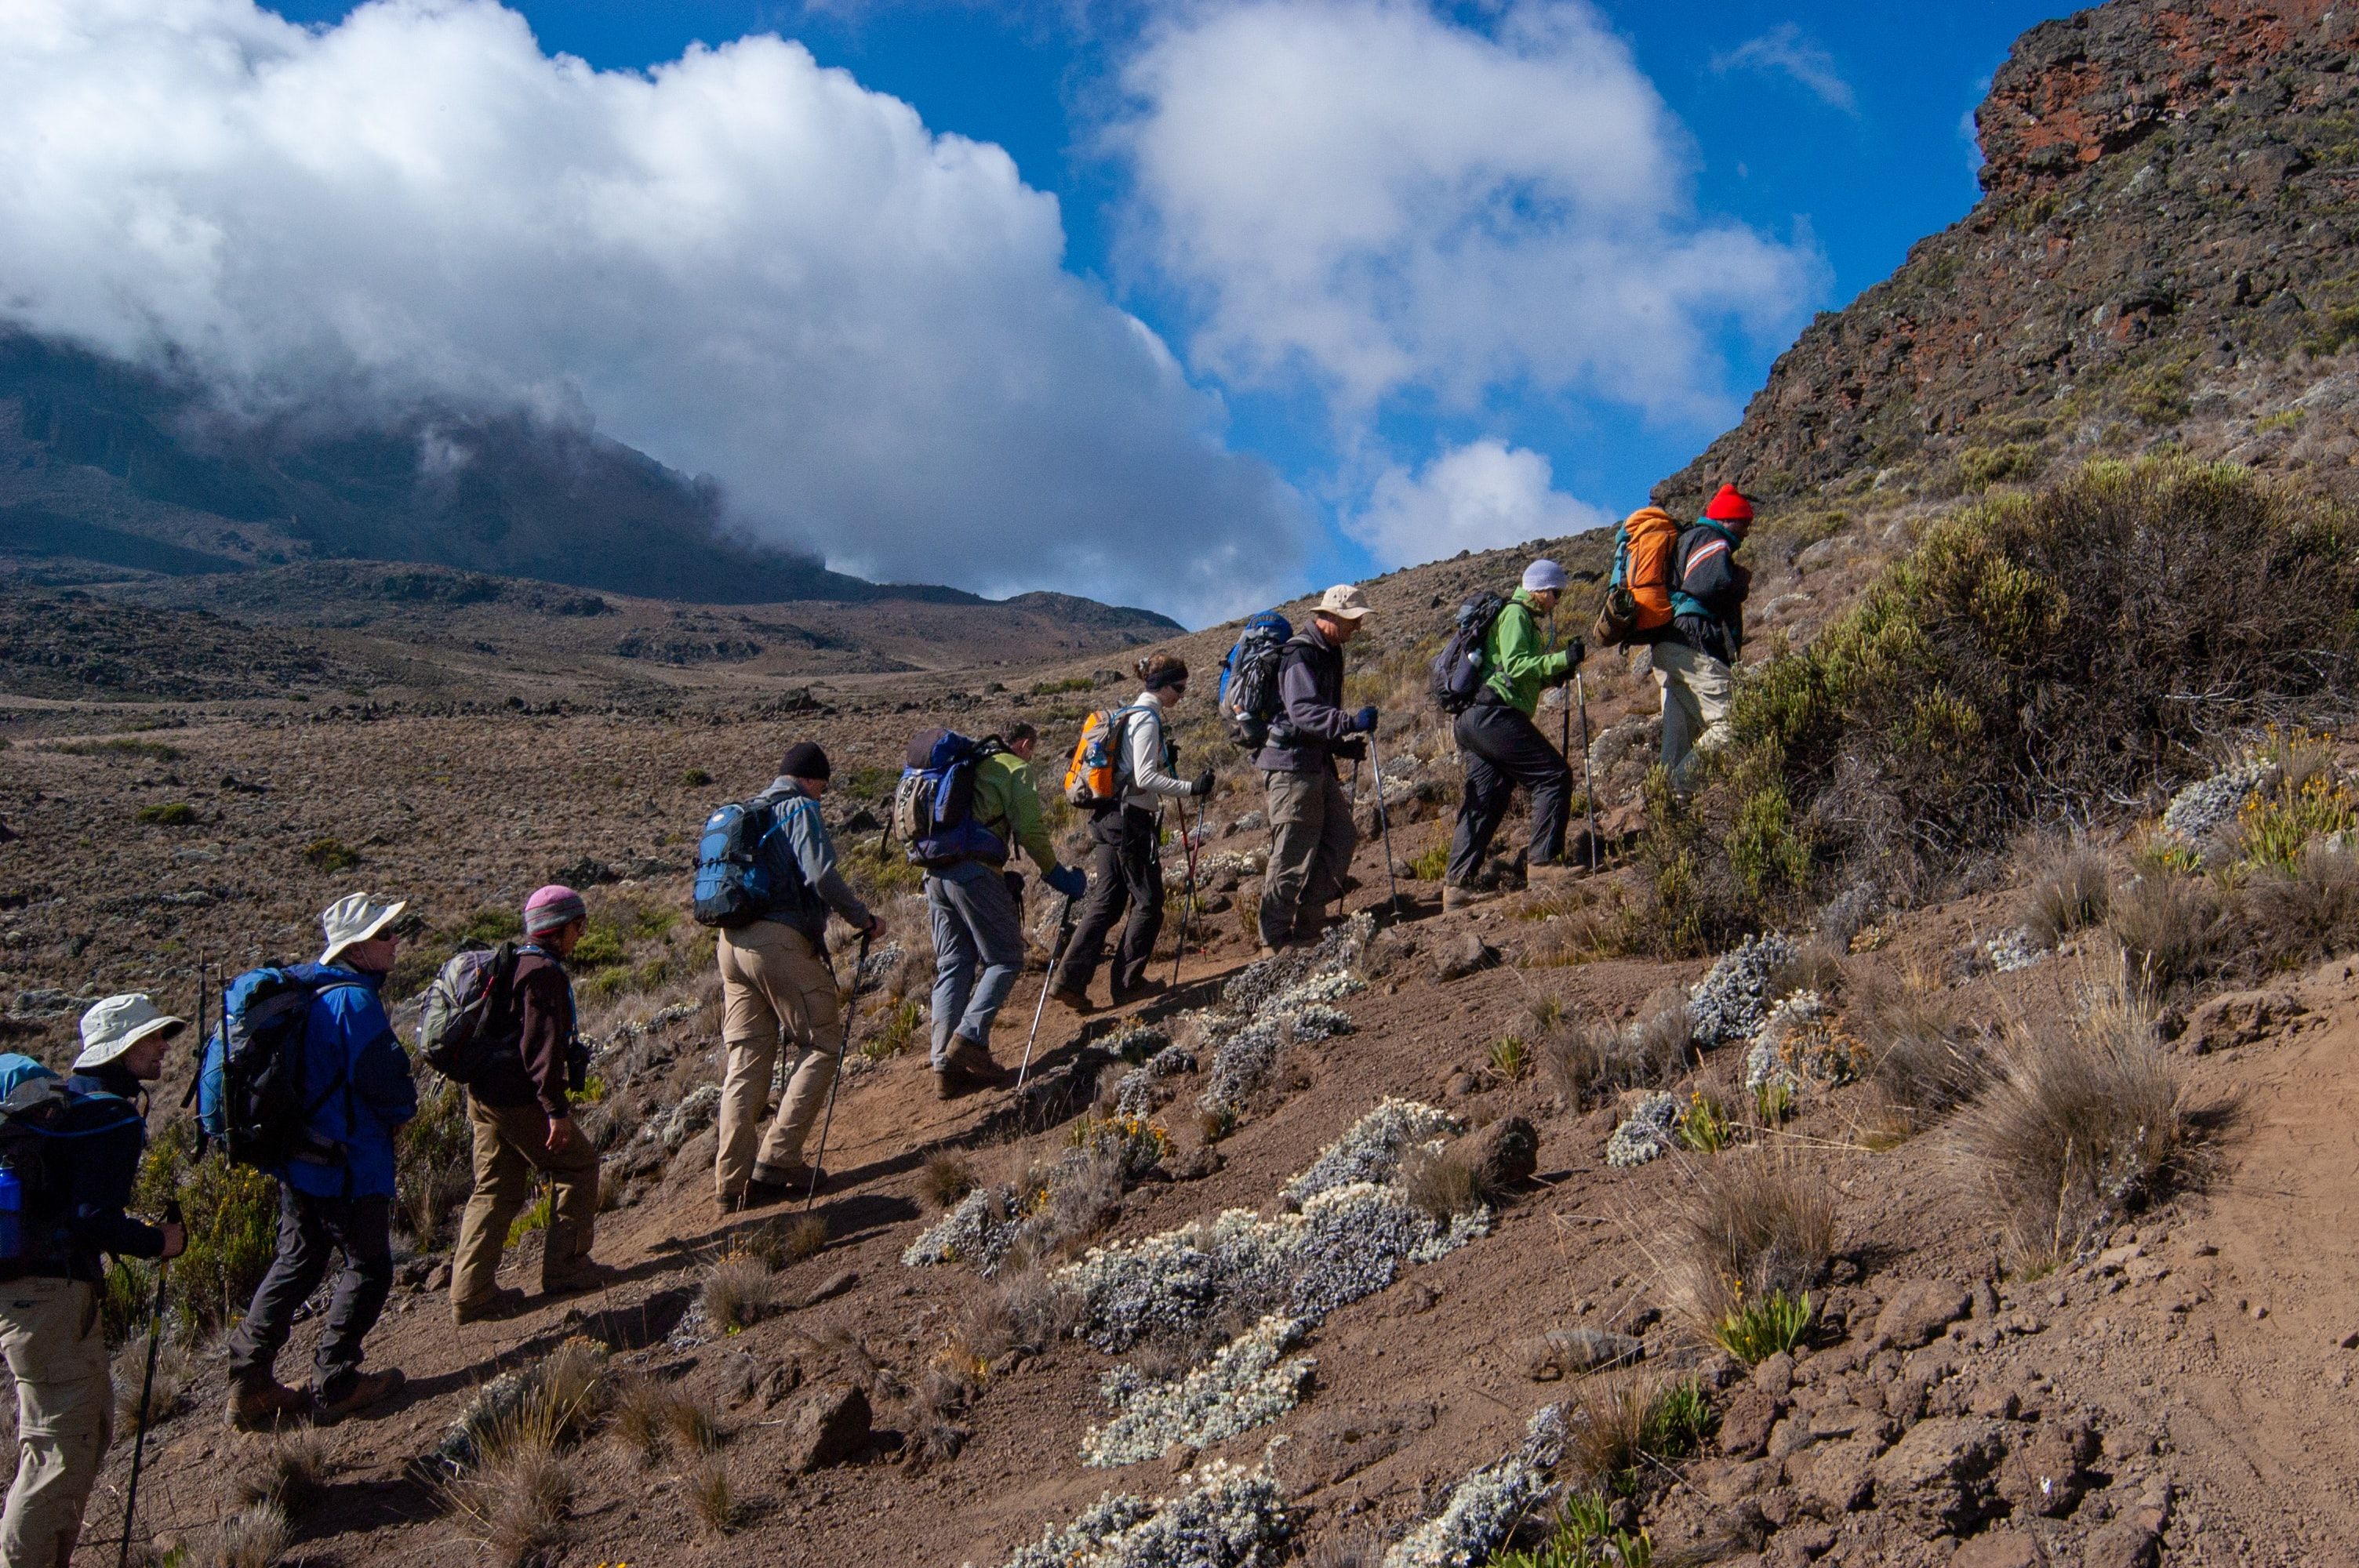 Mount Kilimanjaro, the highest in Africa, now has internet